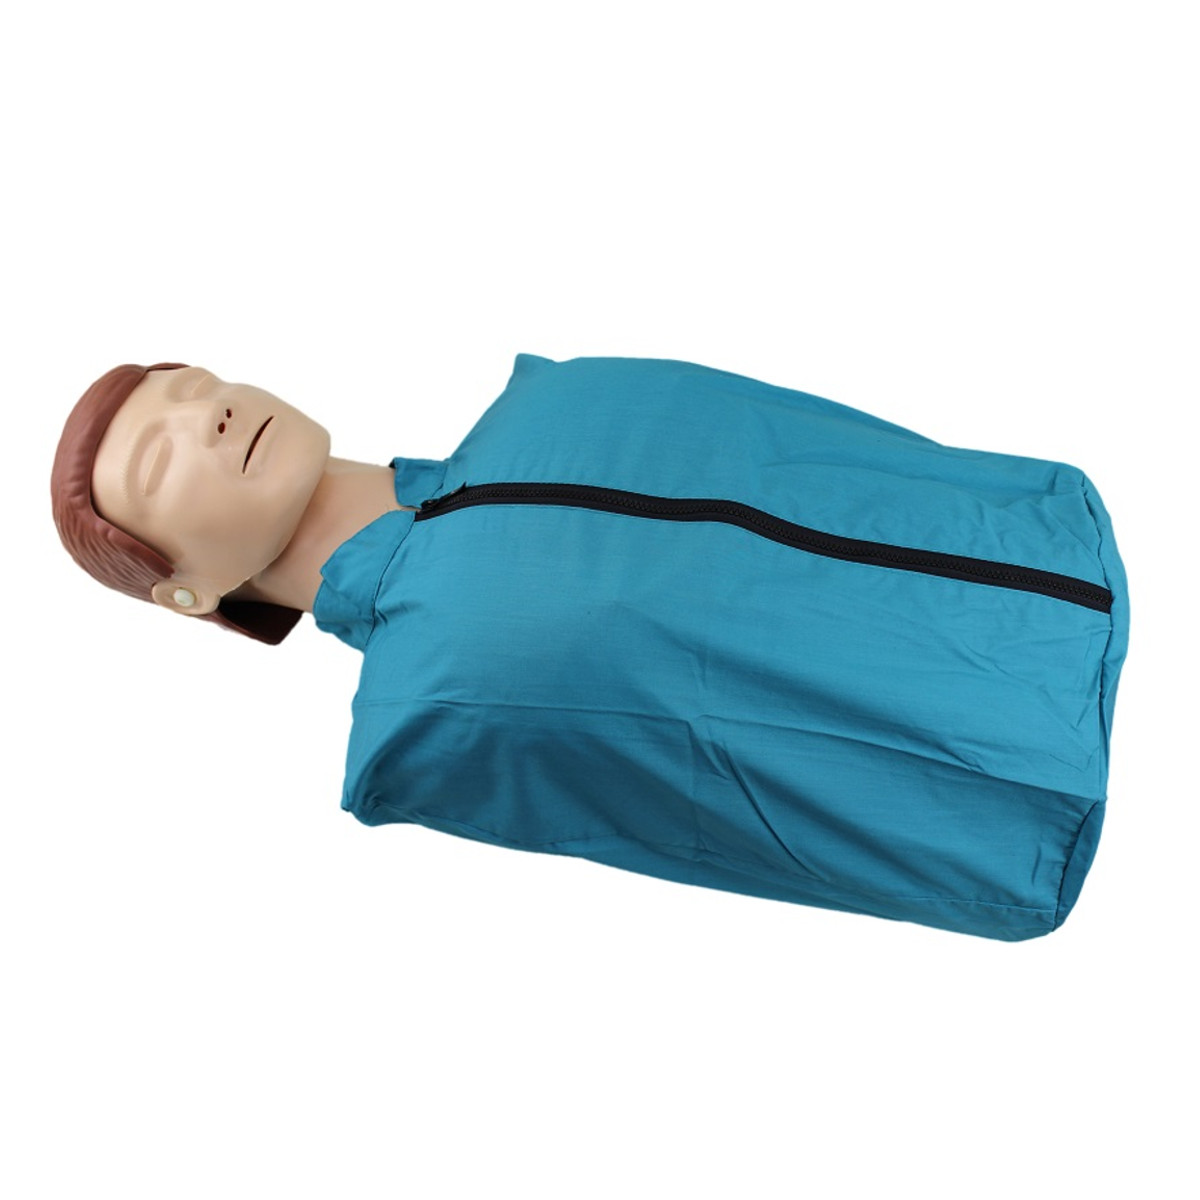 CPR Adult Manikin AED First Aid Training Dummy Training Medical Model Respiration Human 11